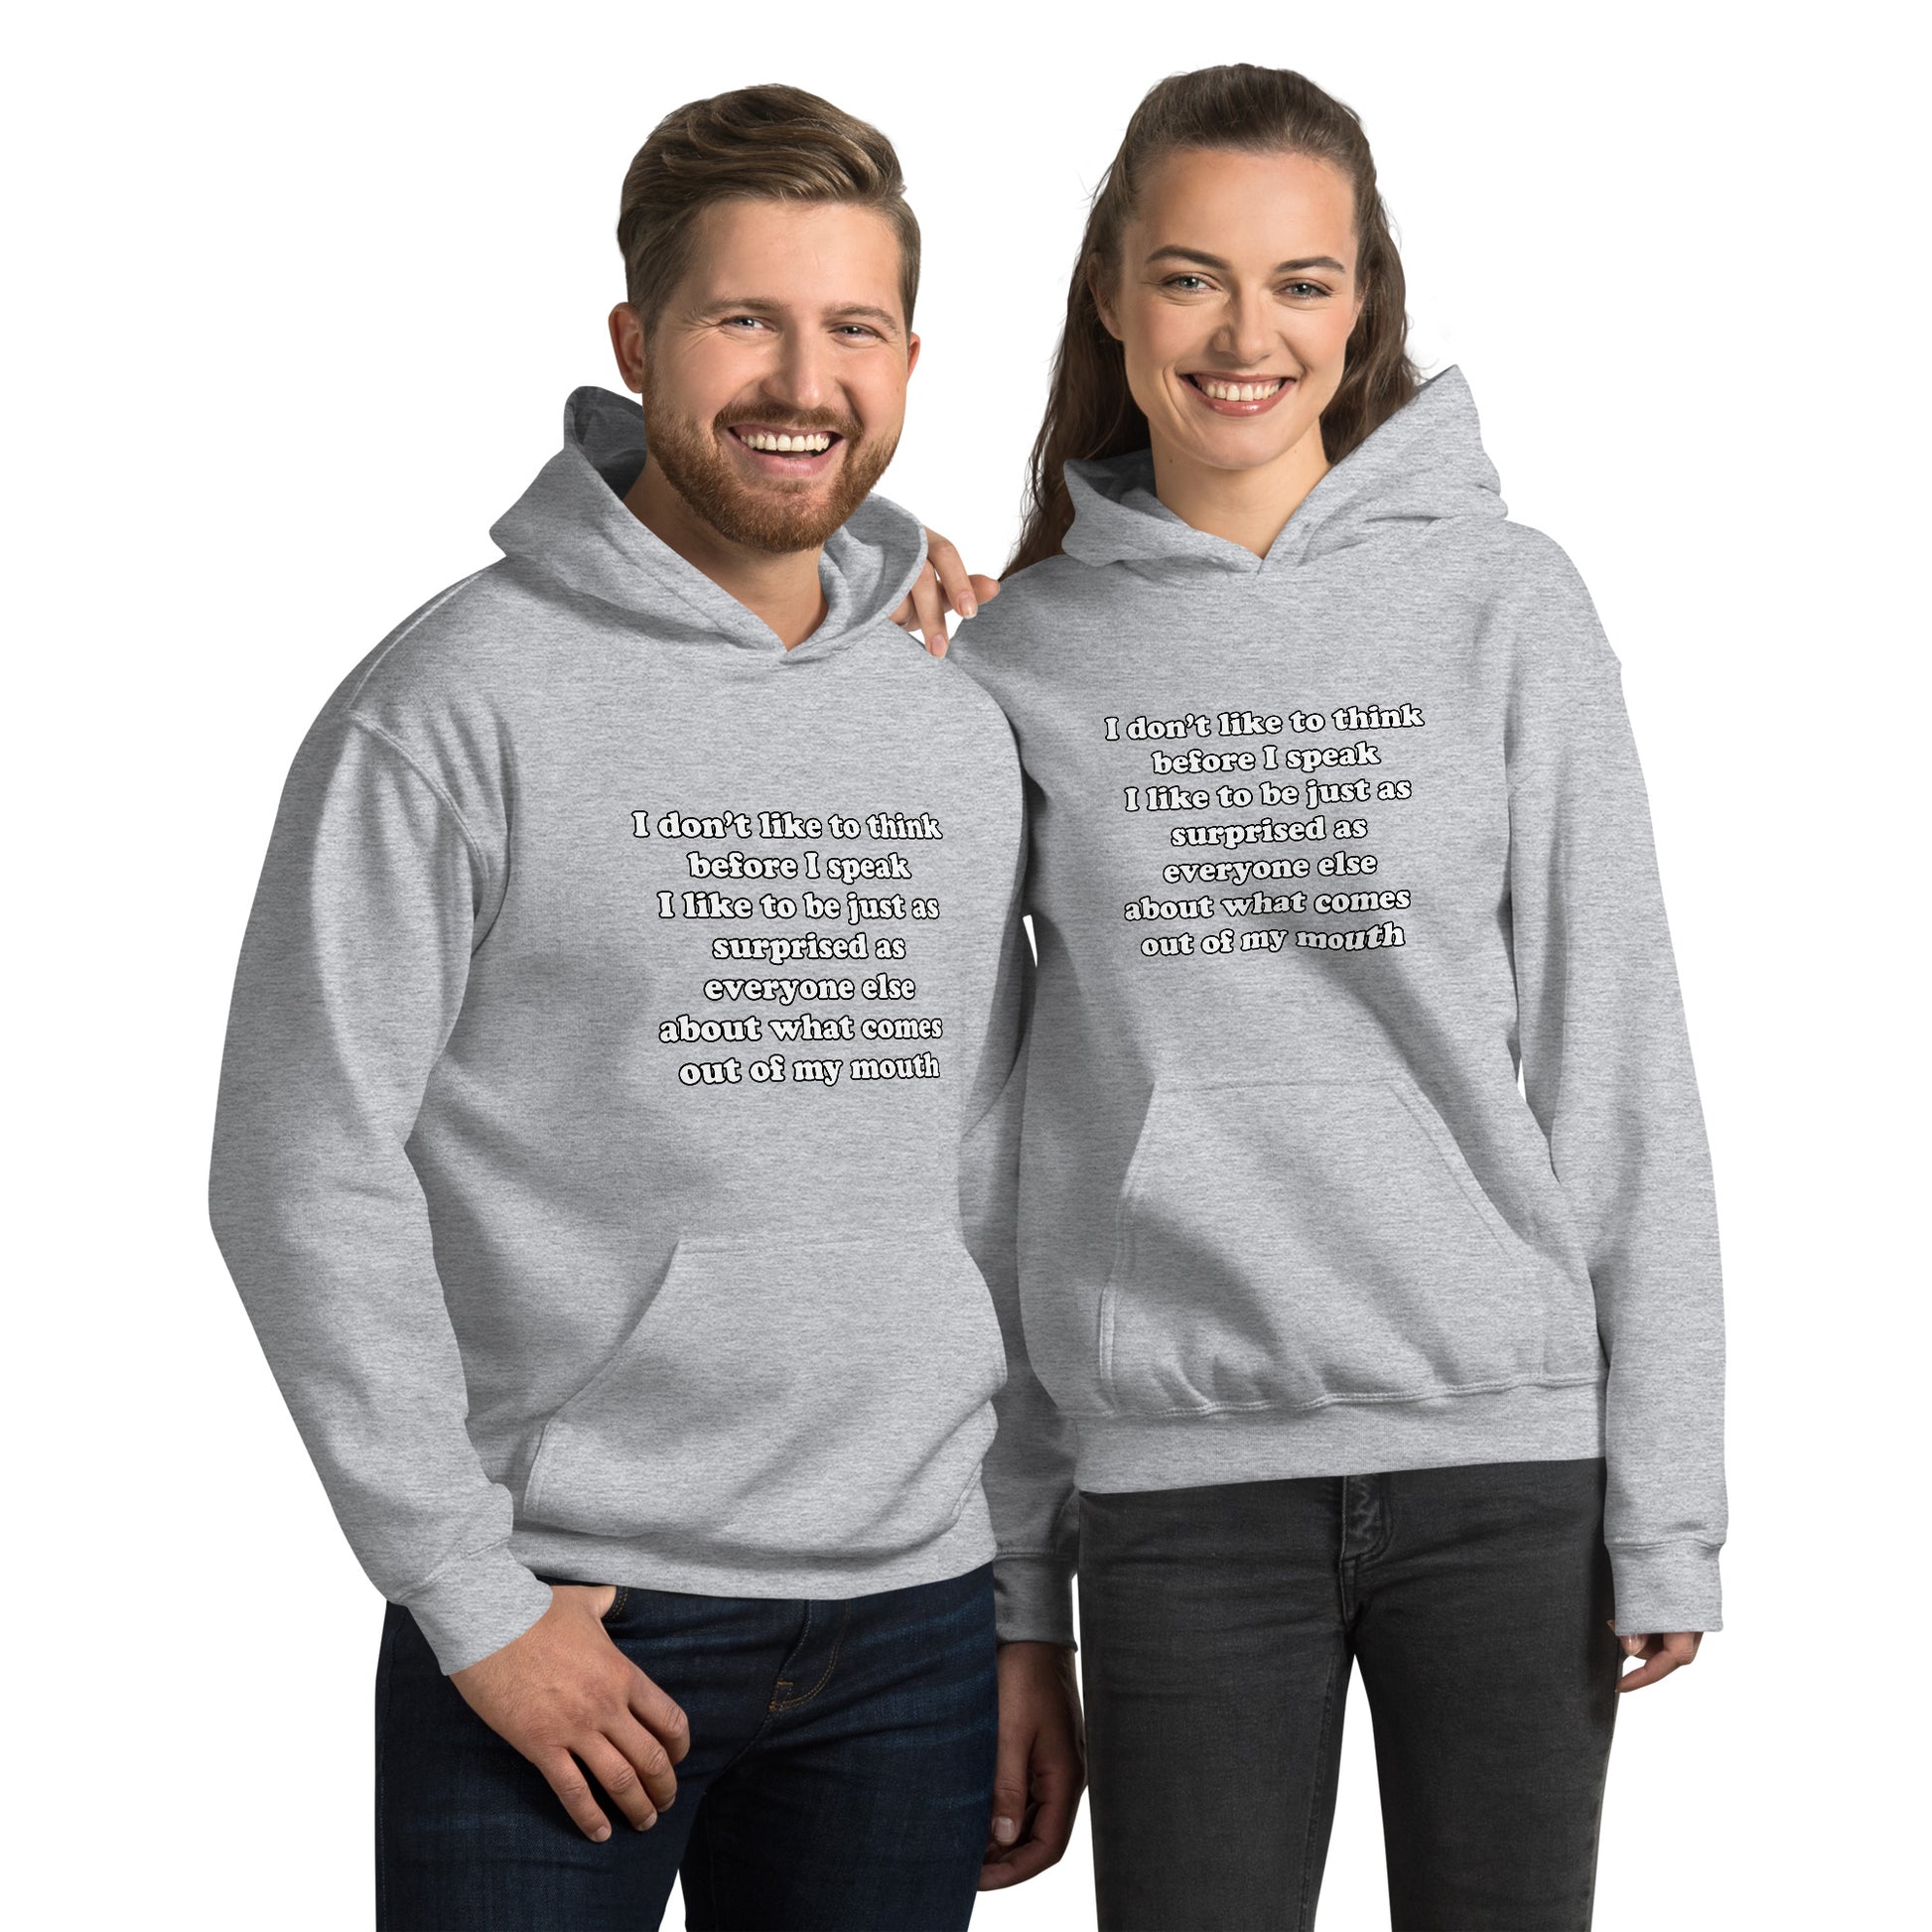 Man and woman with grey hoodie with text “I don't think before I speak Just as serprised as everyone about what comes out of my mouth"